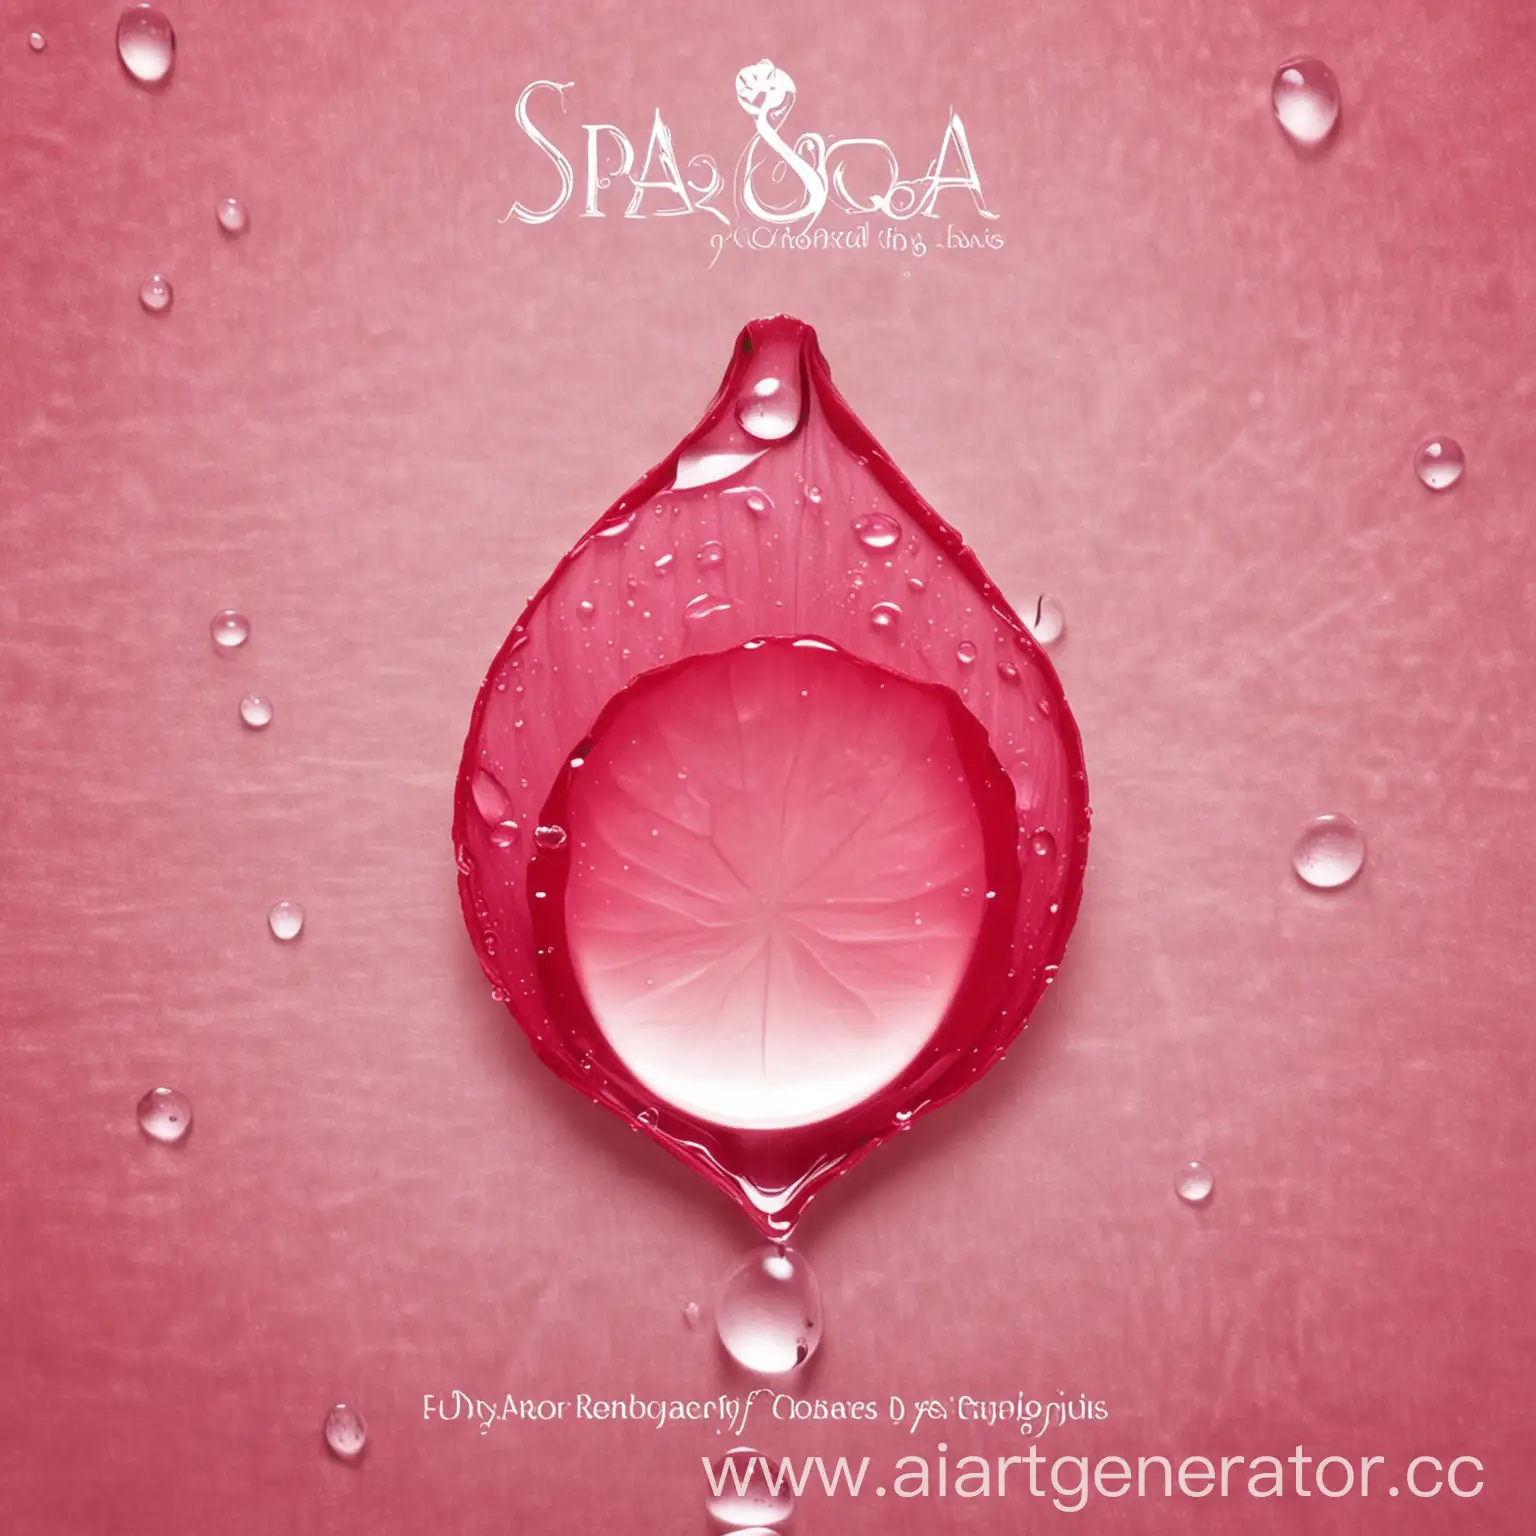 Rejuvenating-Waters-Serene-Spa-Services-for-Timeless-Beauty